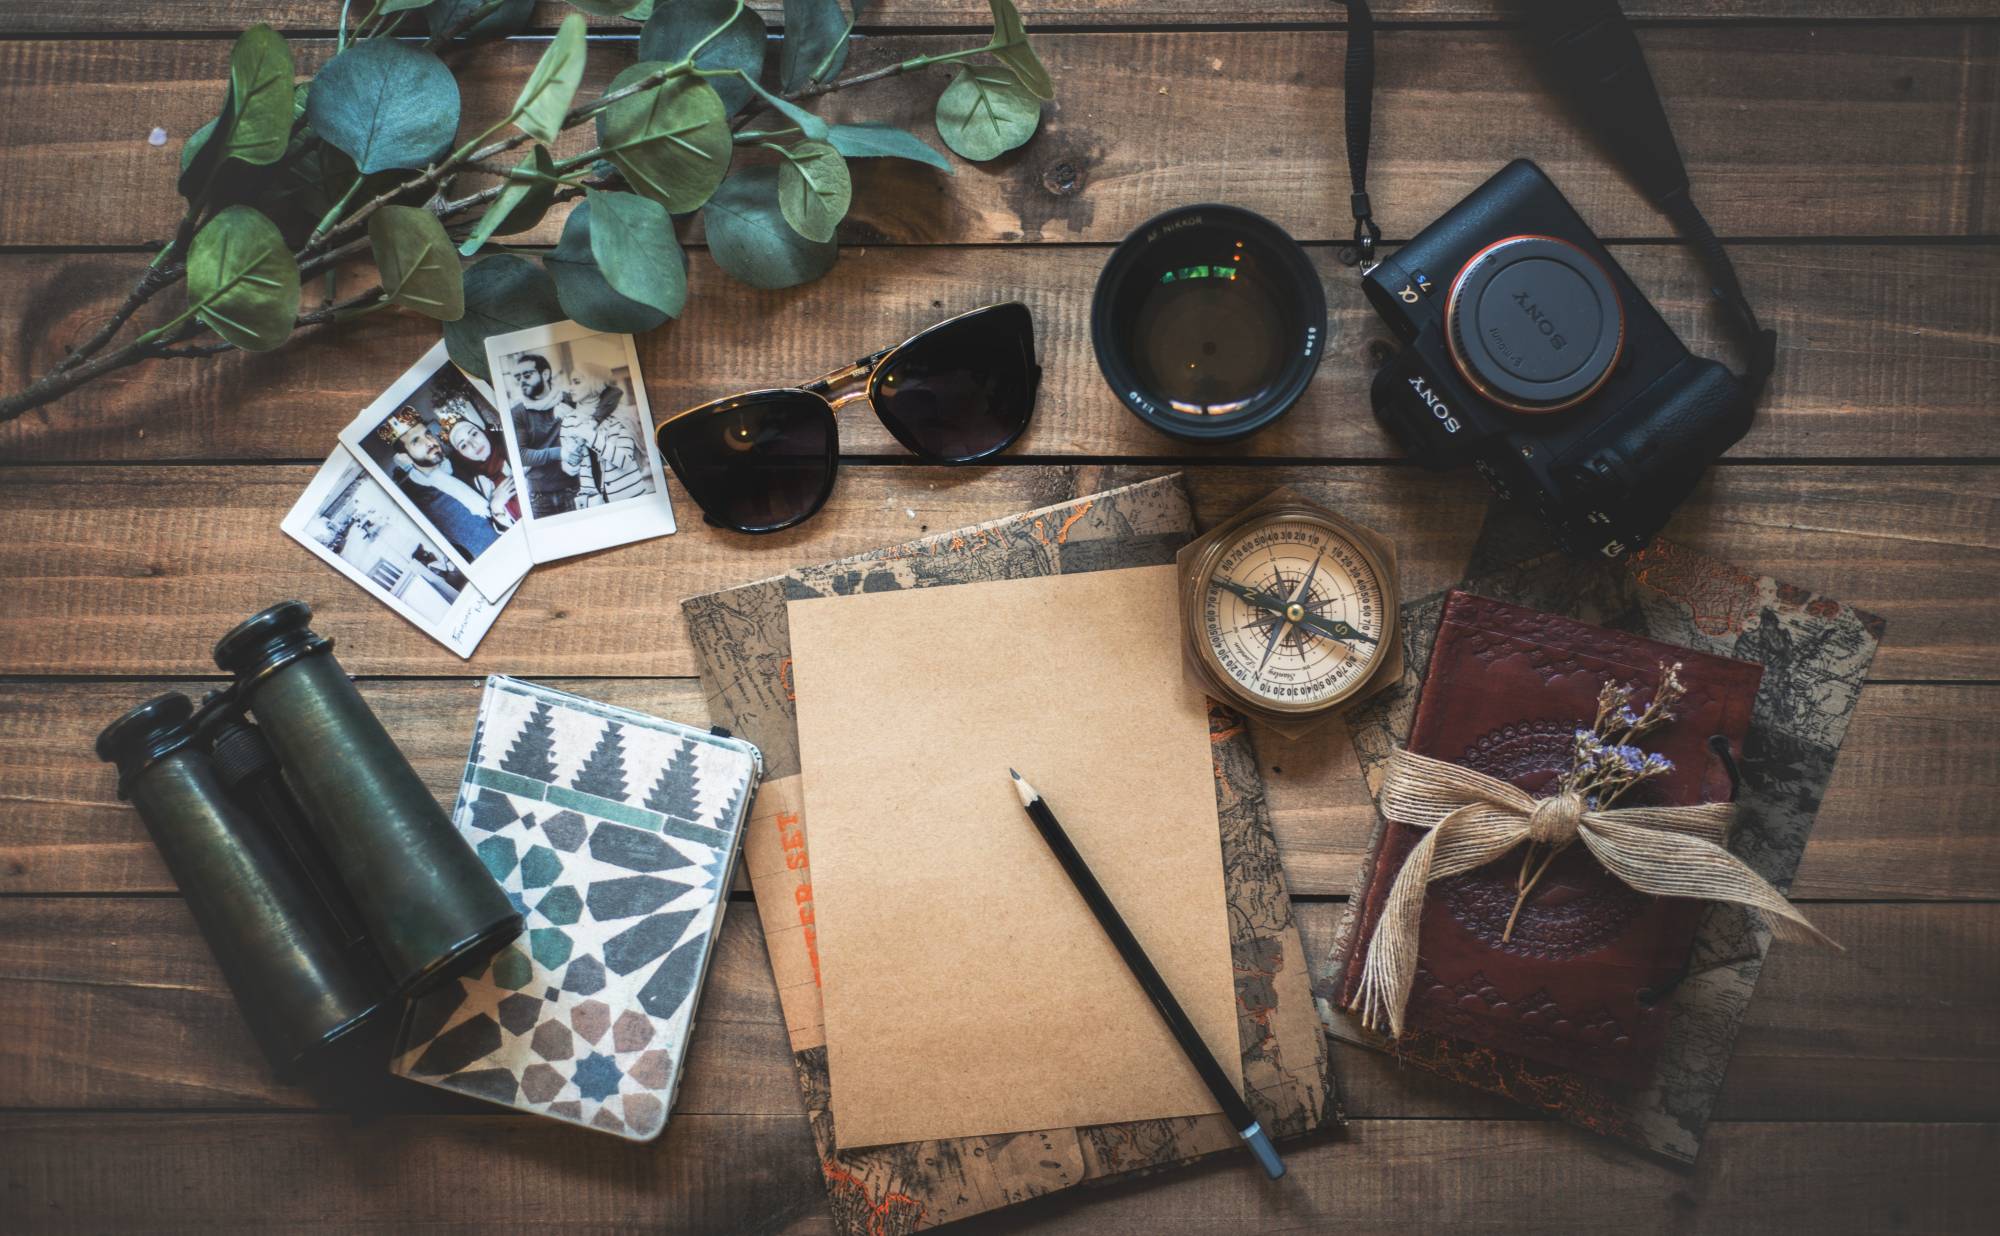 Compass, sunglasses, camera, binoculars, leaves, cards, and journals on a desk